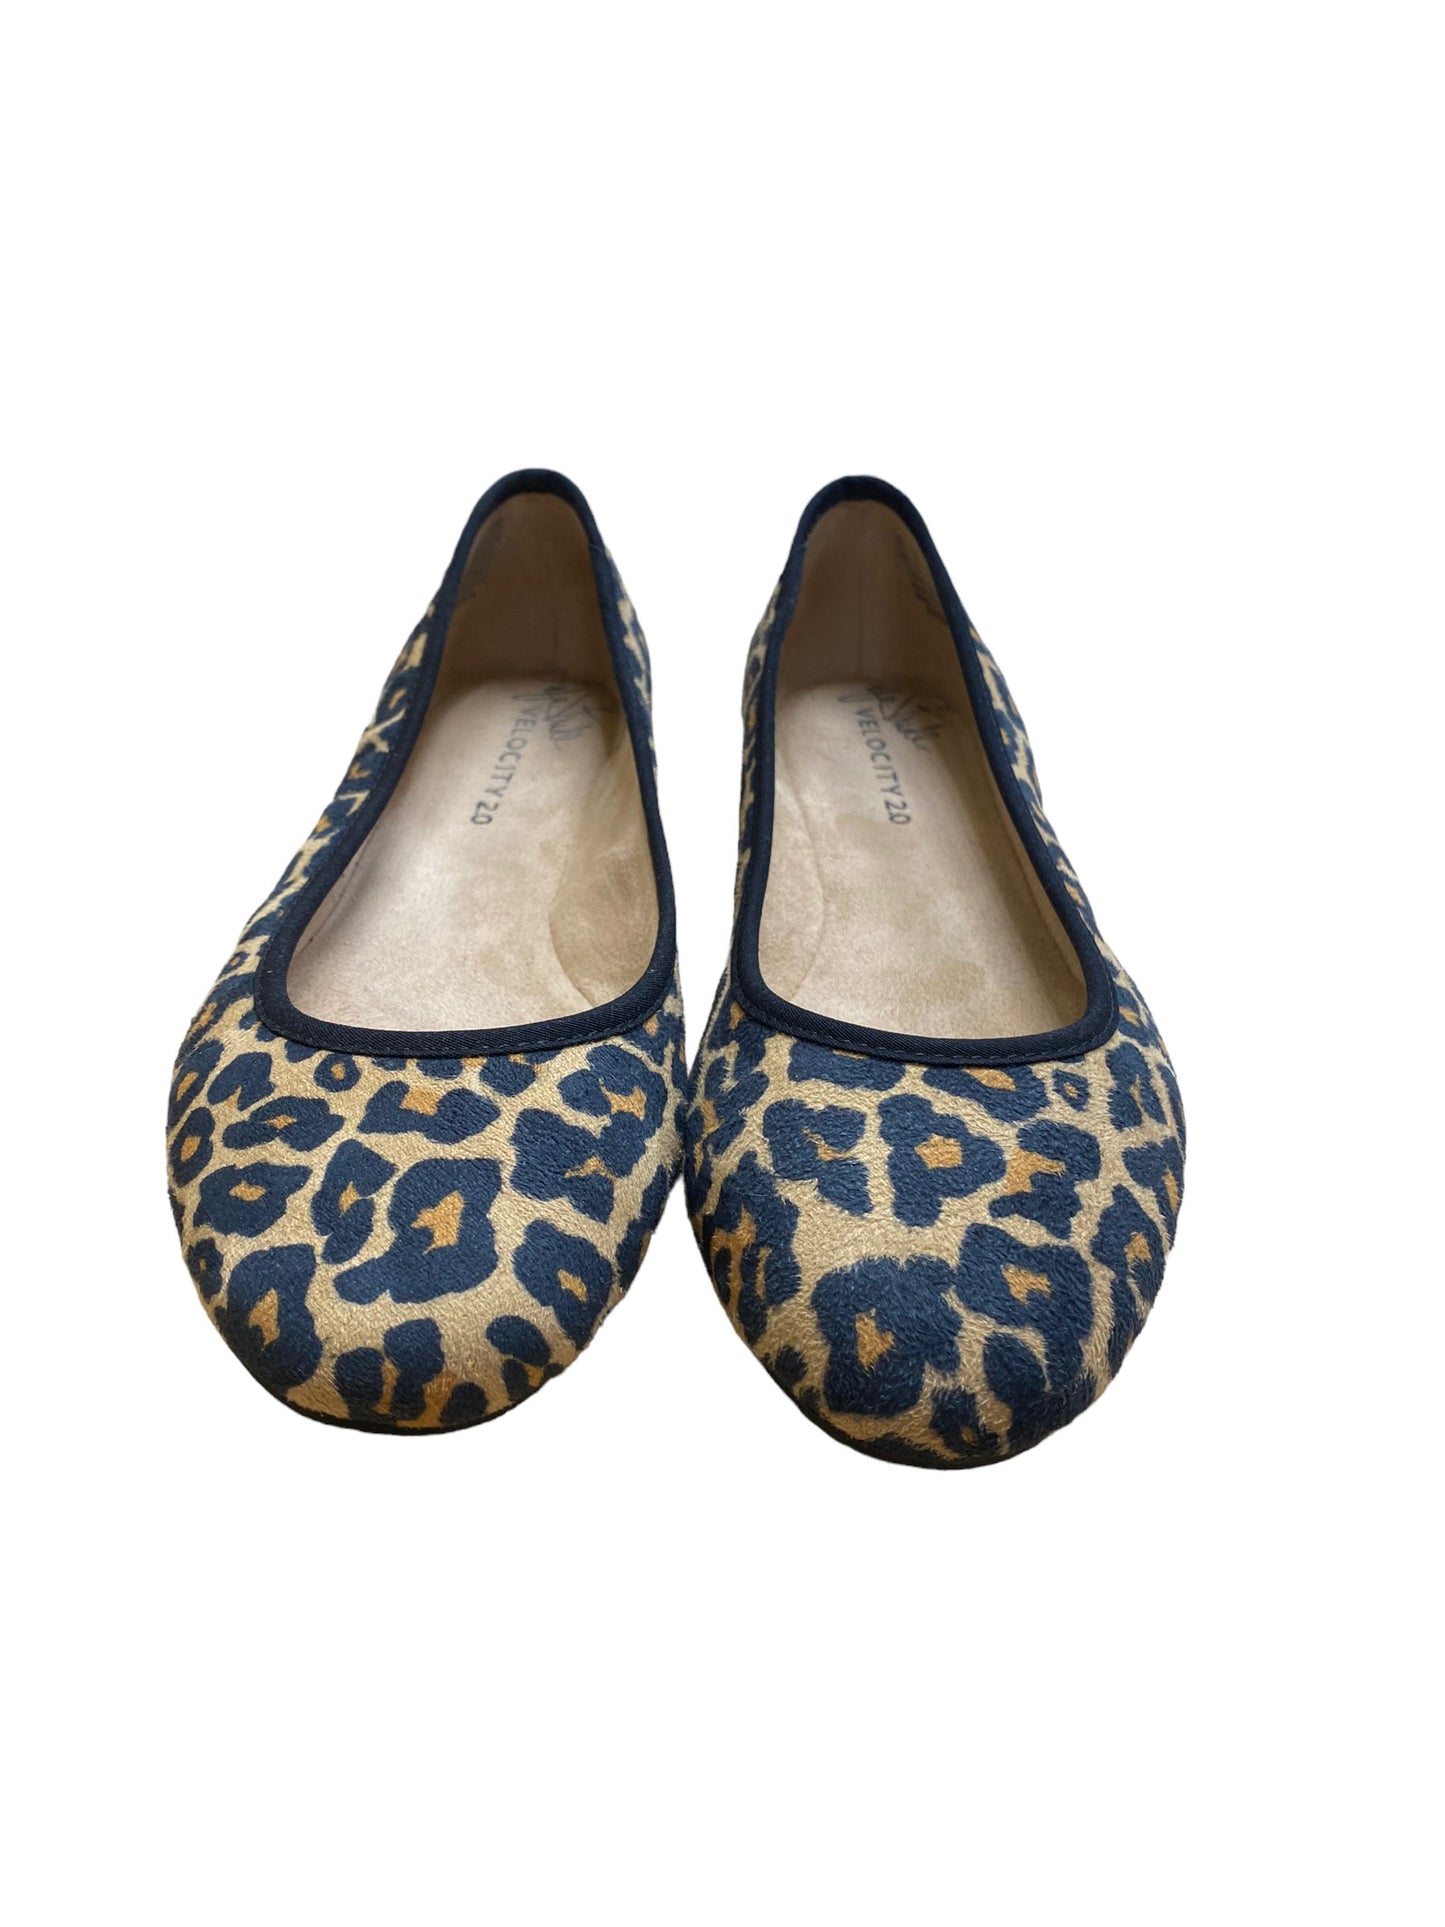 Shoes Flats By Life Stride  Size: 7